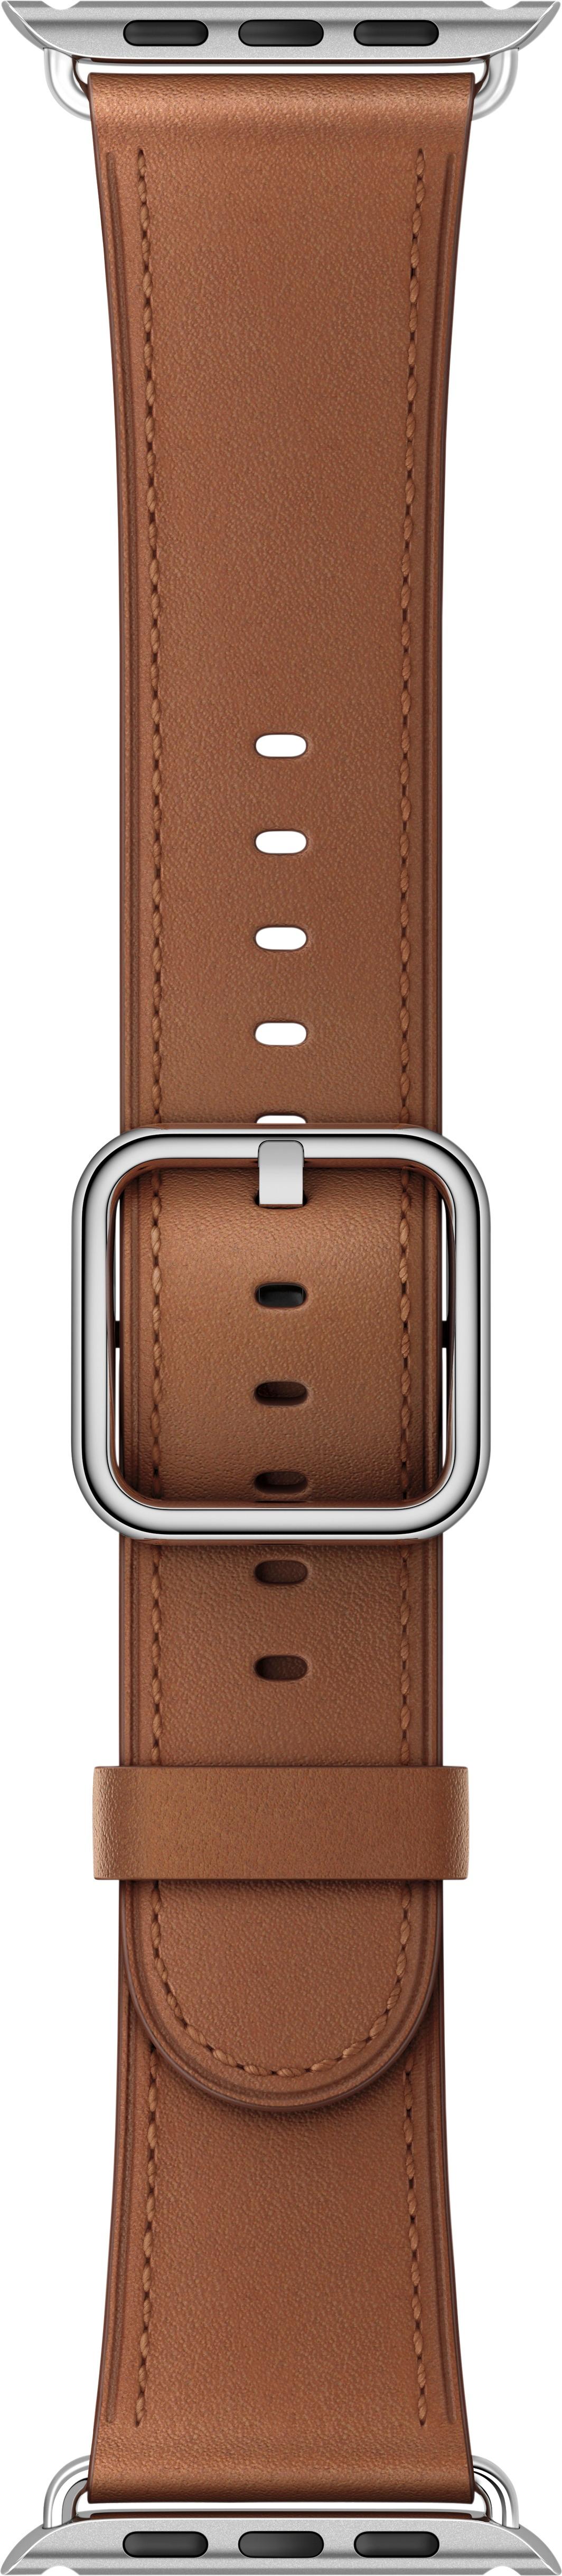 Apple Watch 38mm Saddle Brown 